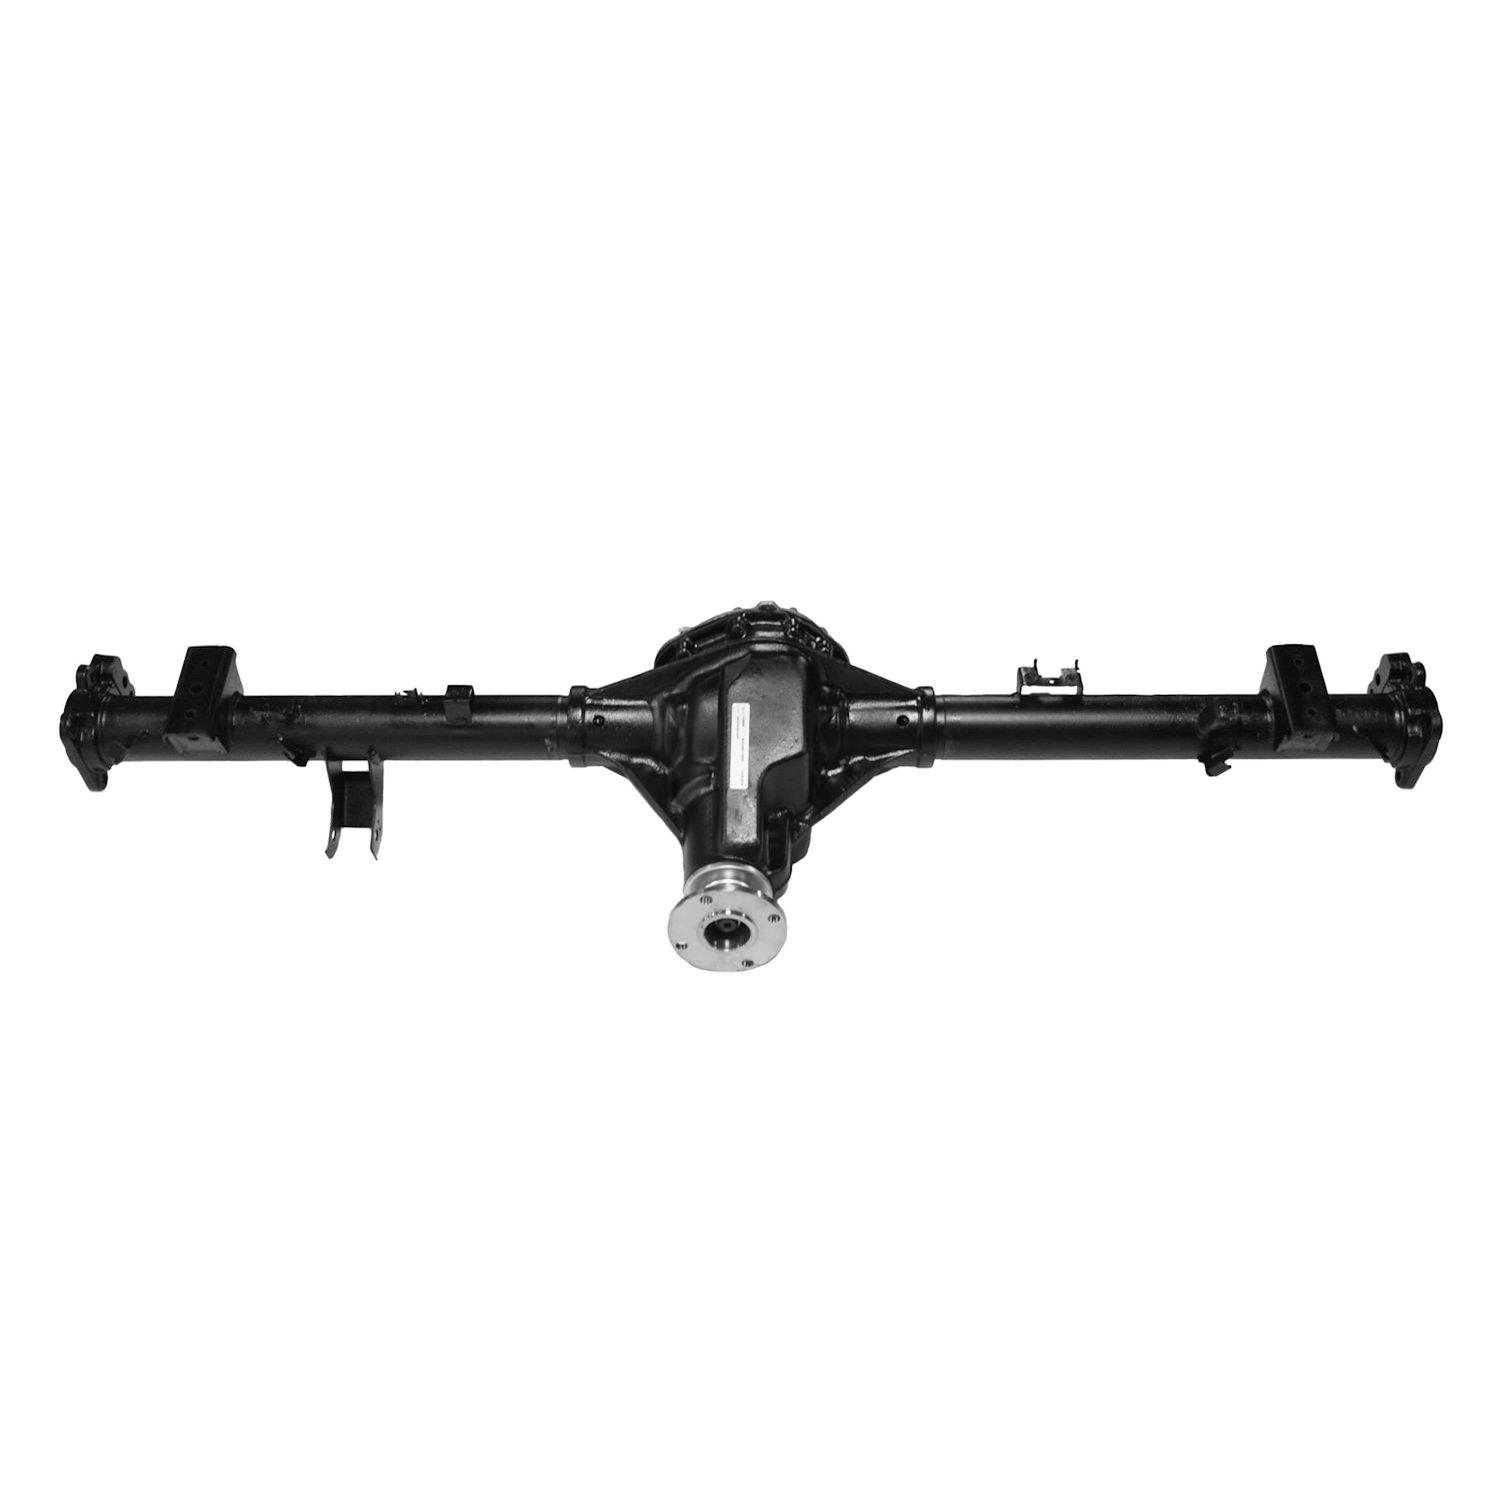 Remanufactured Dana 44 Axle Assembly for 08-15 Nissan Titan, 4x4 159.5" WB, 3.36, Posi